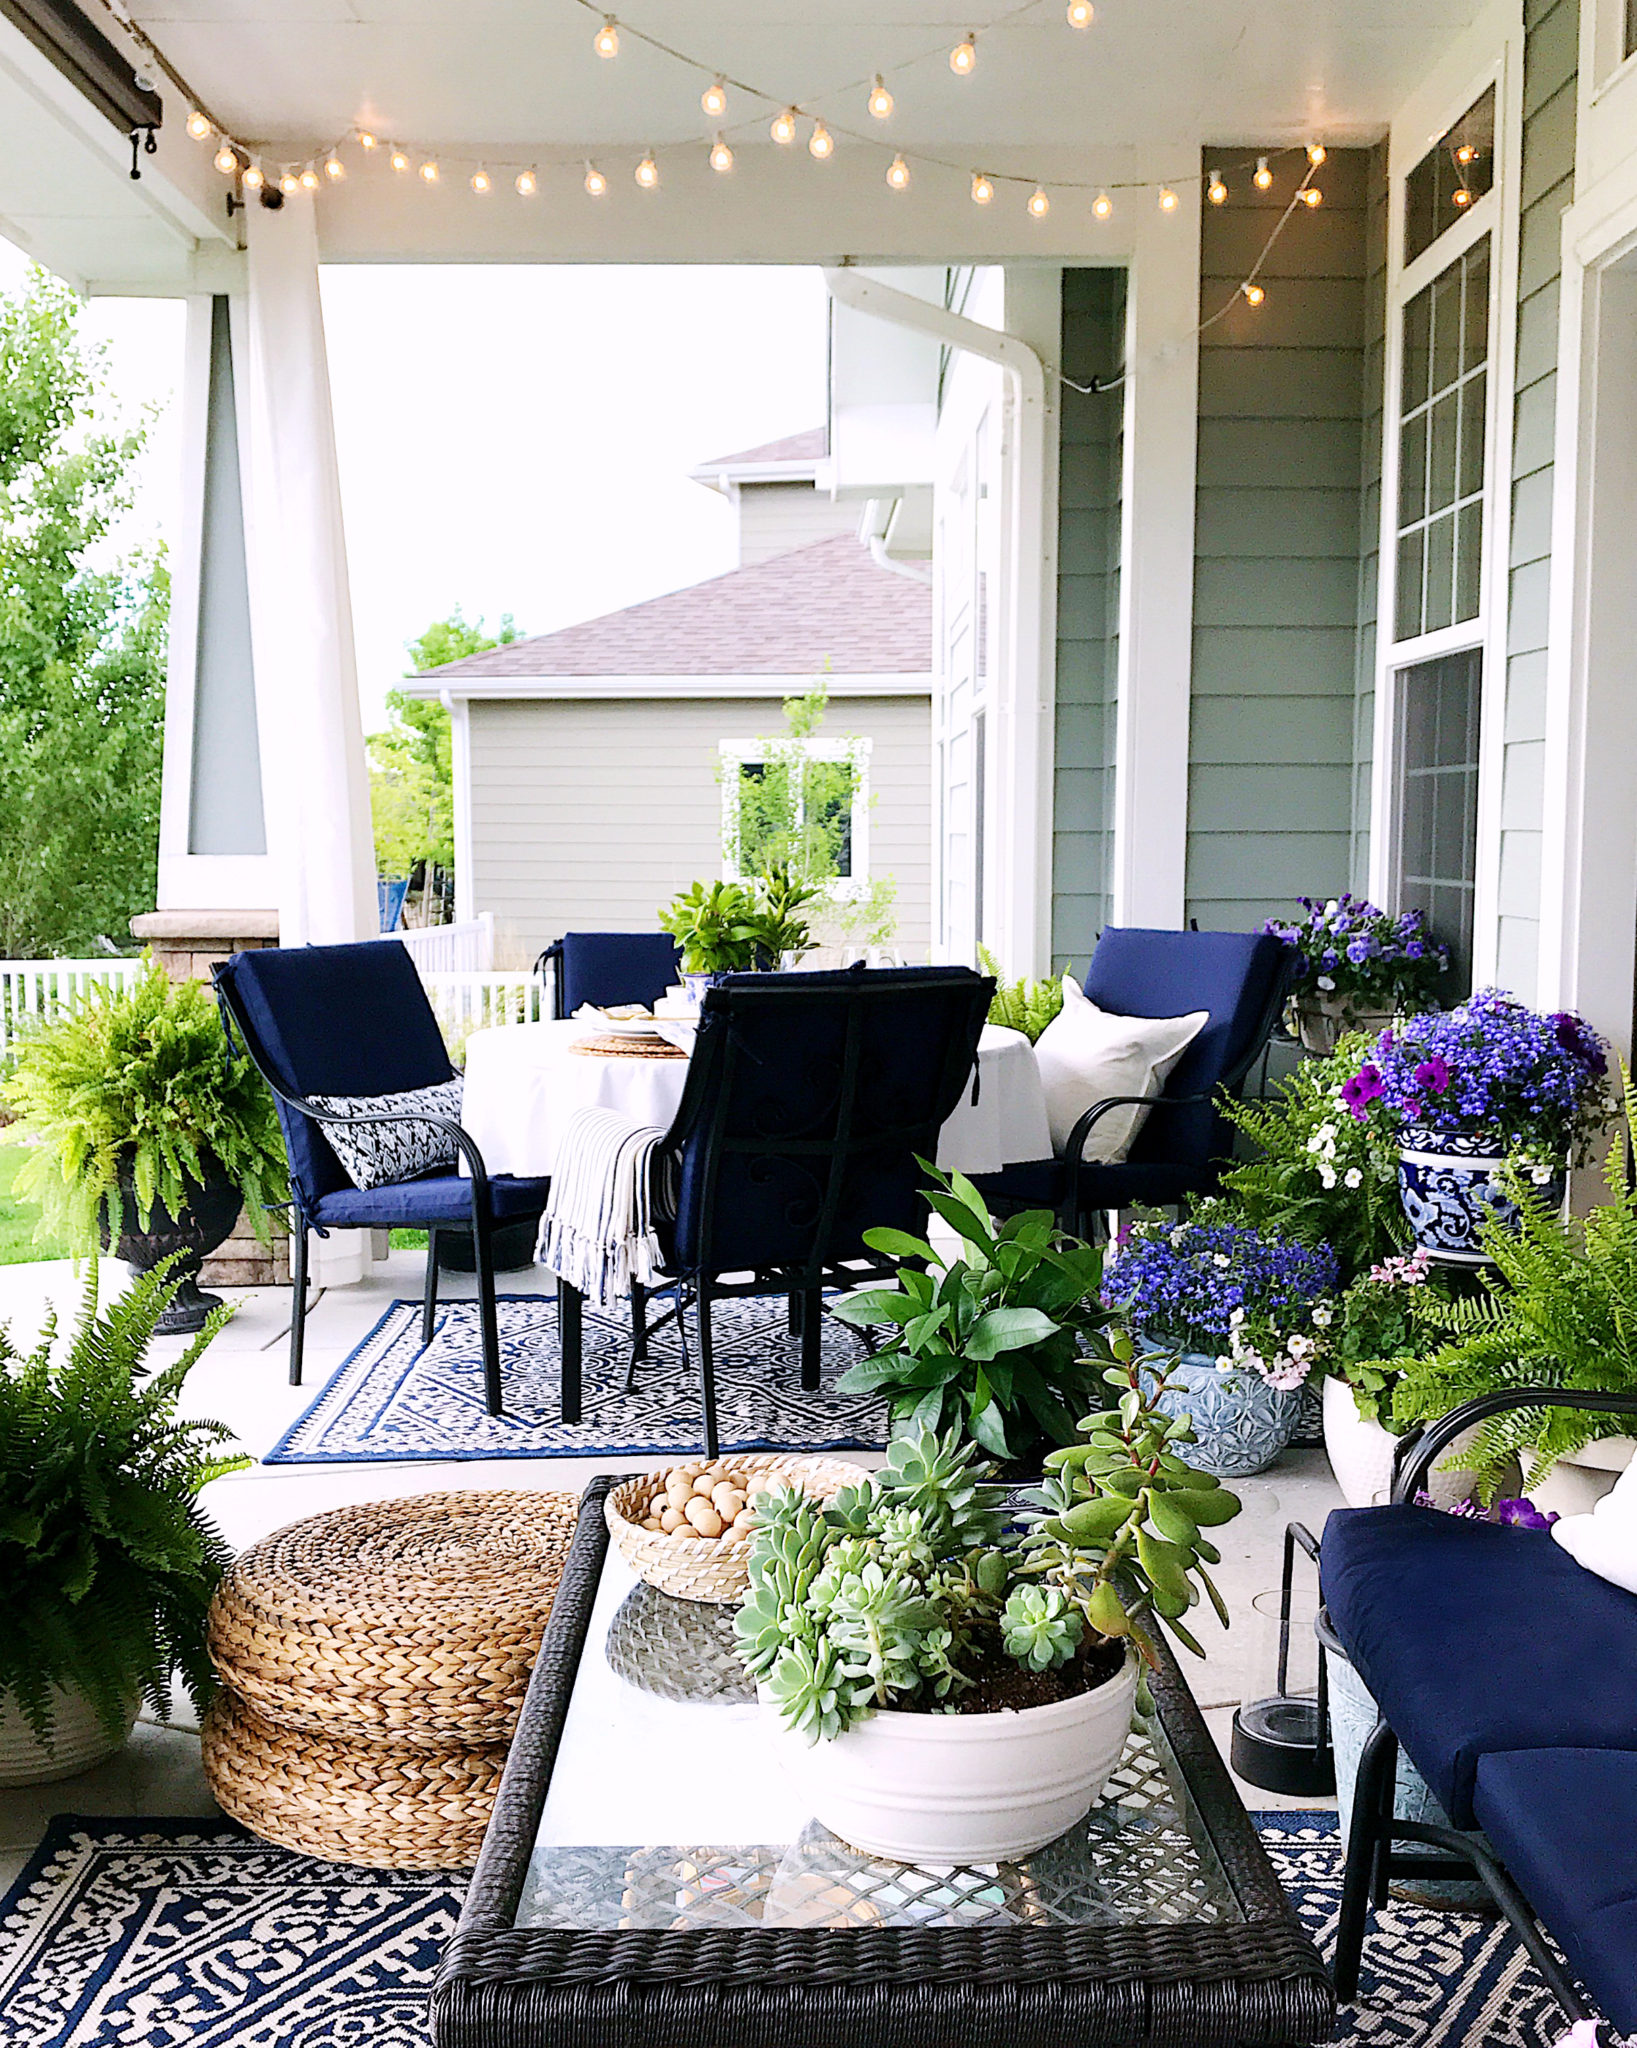 Our patio, all dressed up for summer outdoor living and entertaining - jane at home